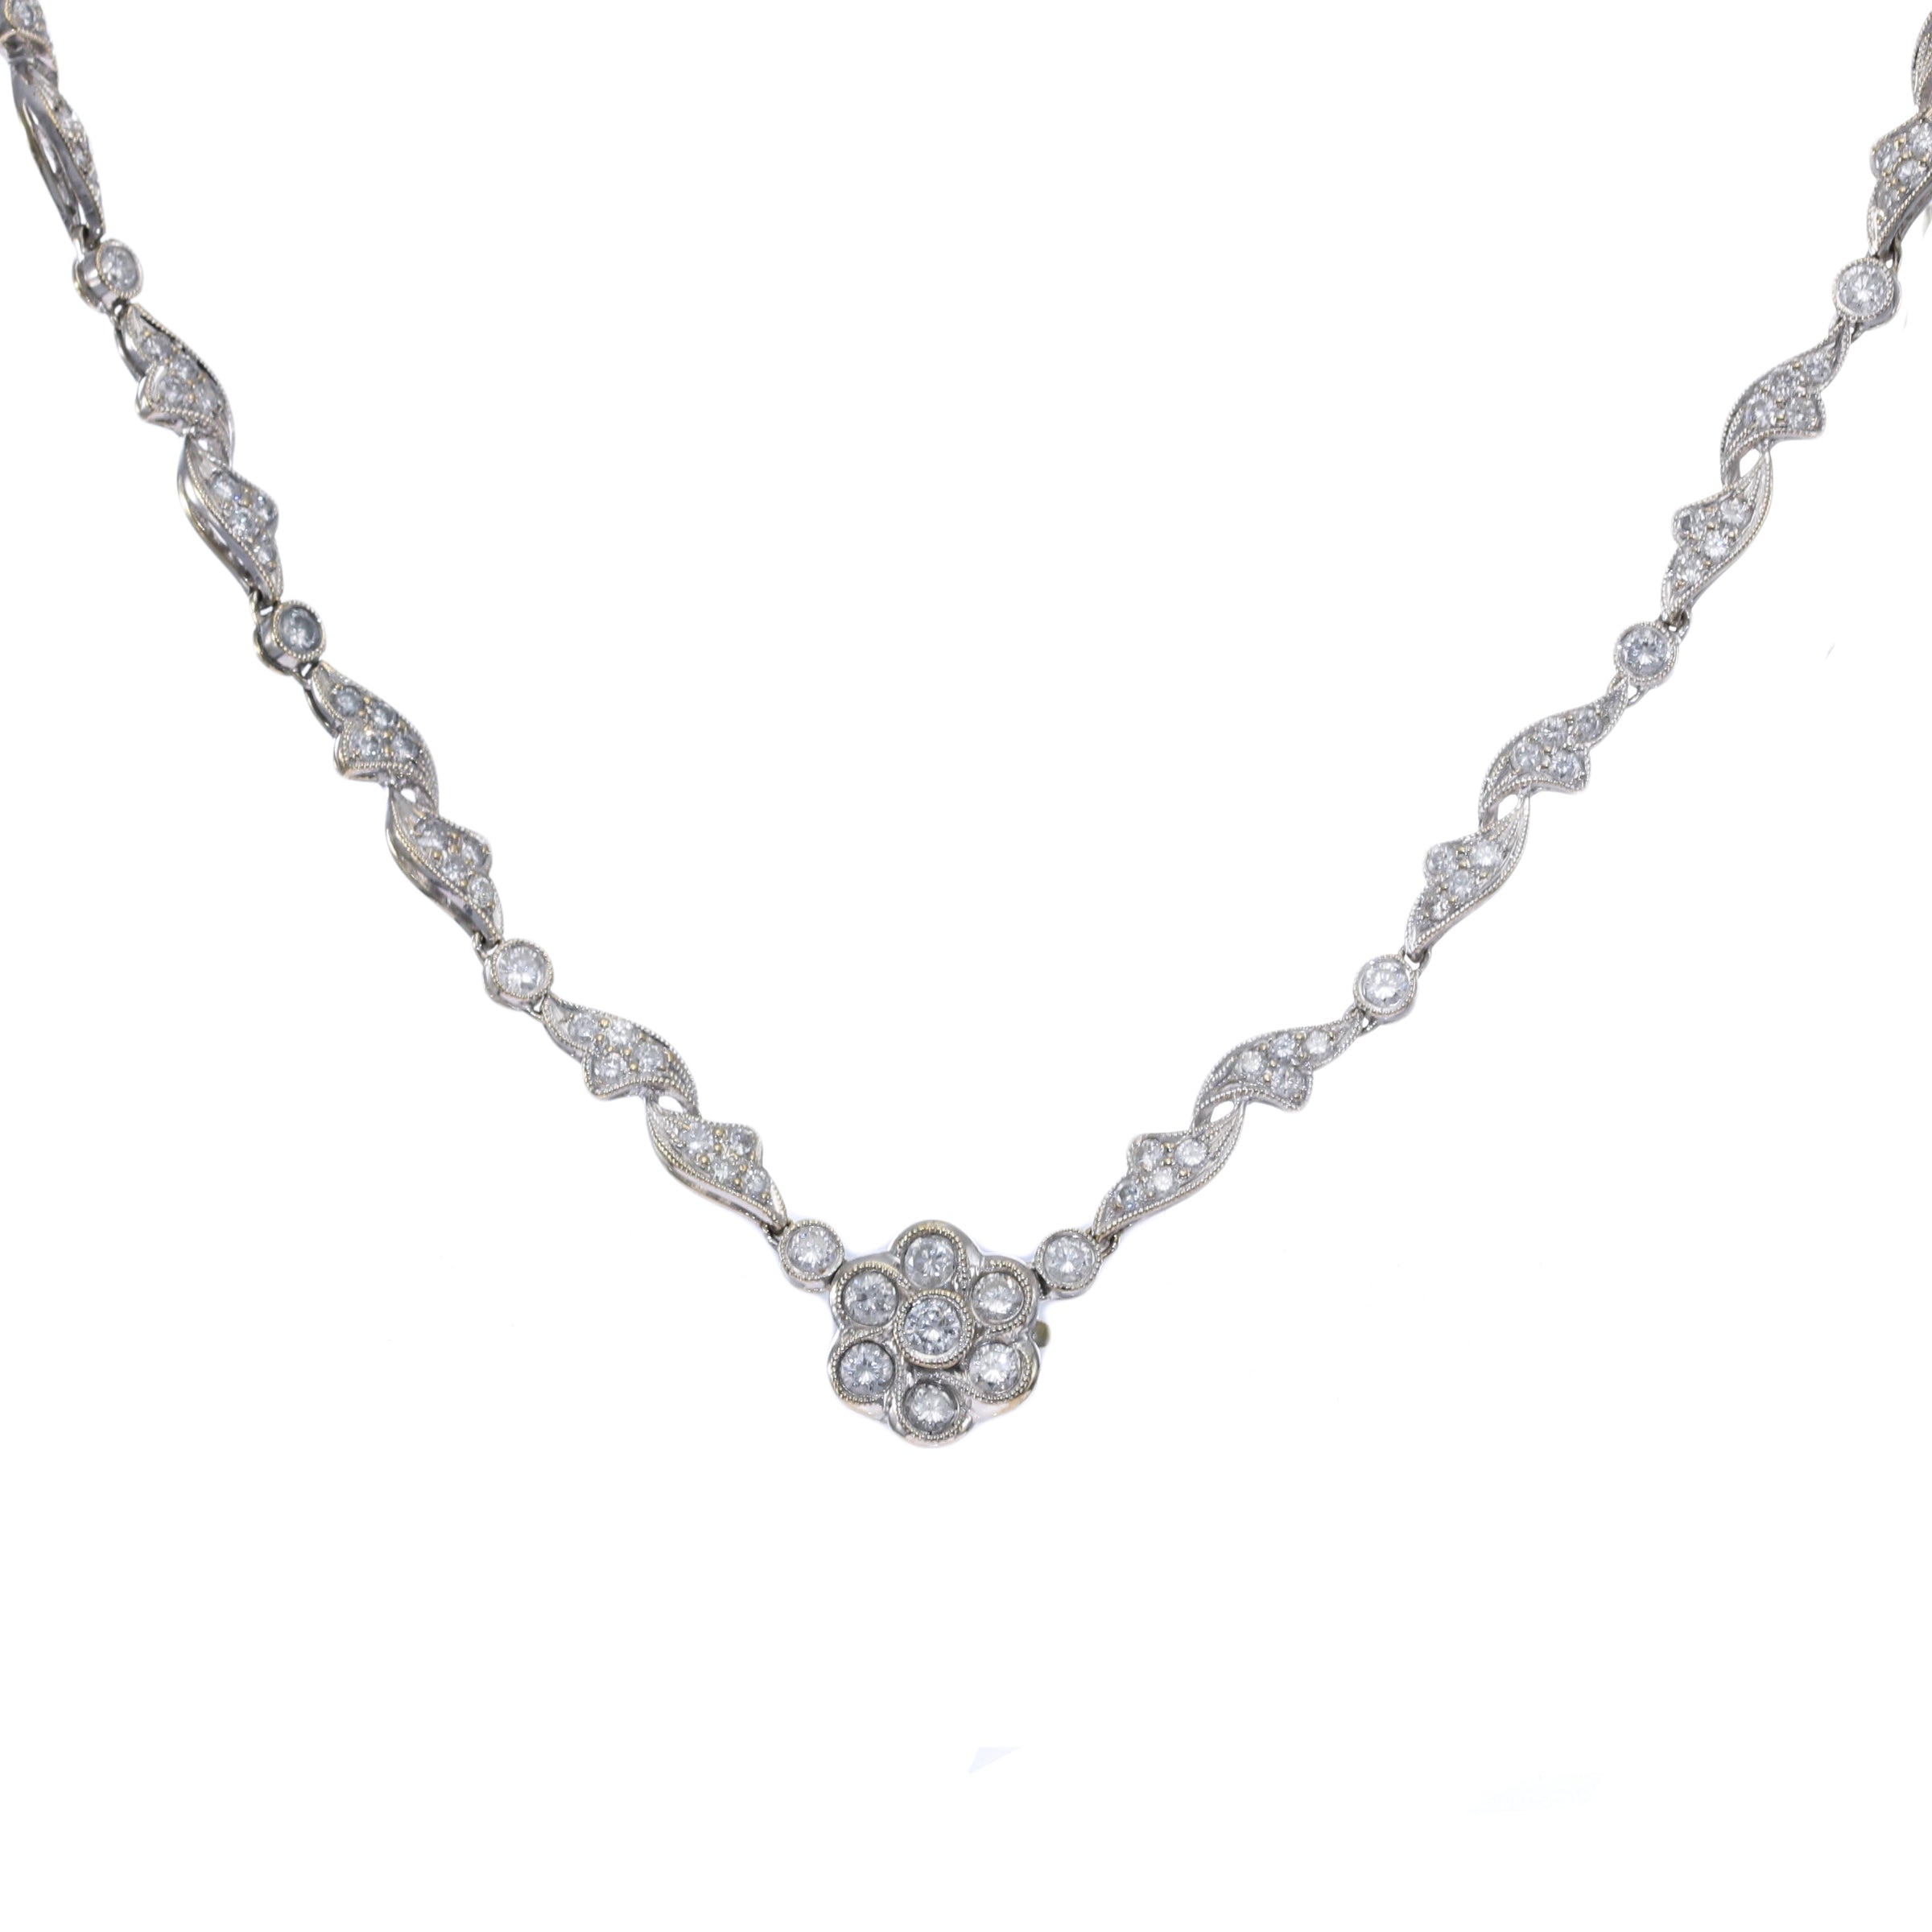 London Collection 18k White Gold Small Diamond Weave Ball Pendant with Chain